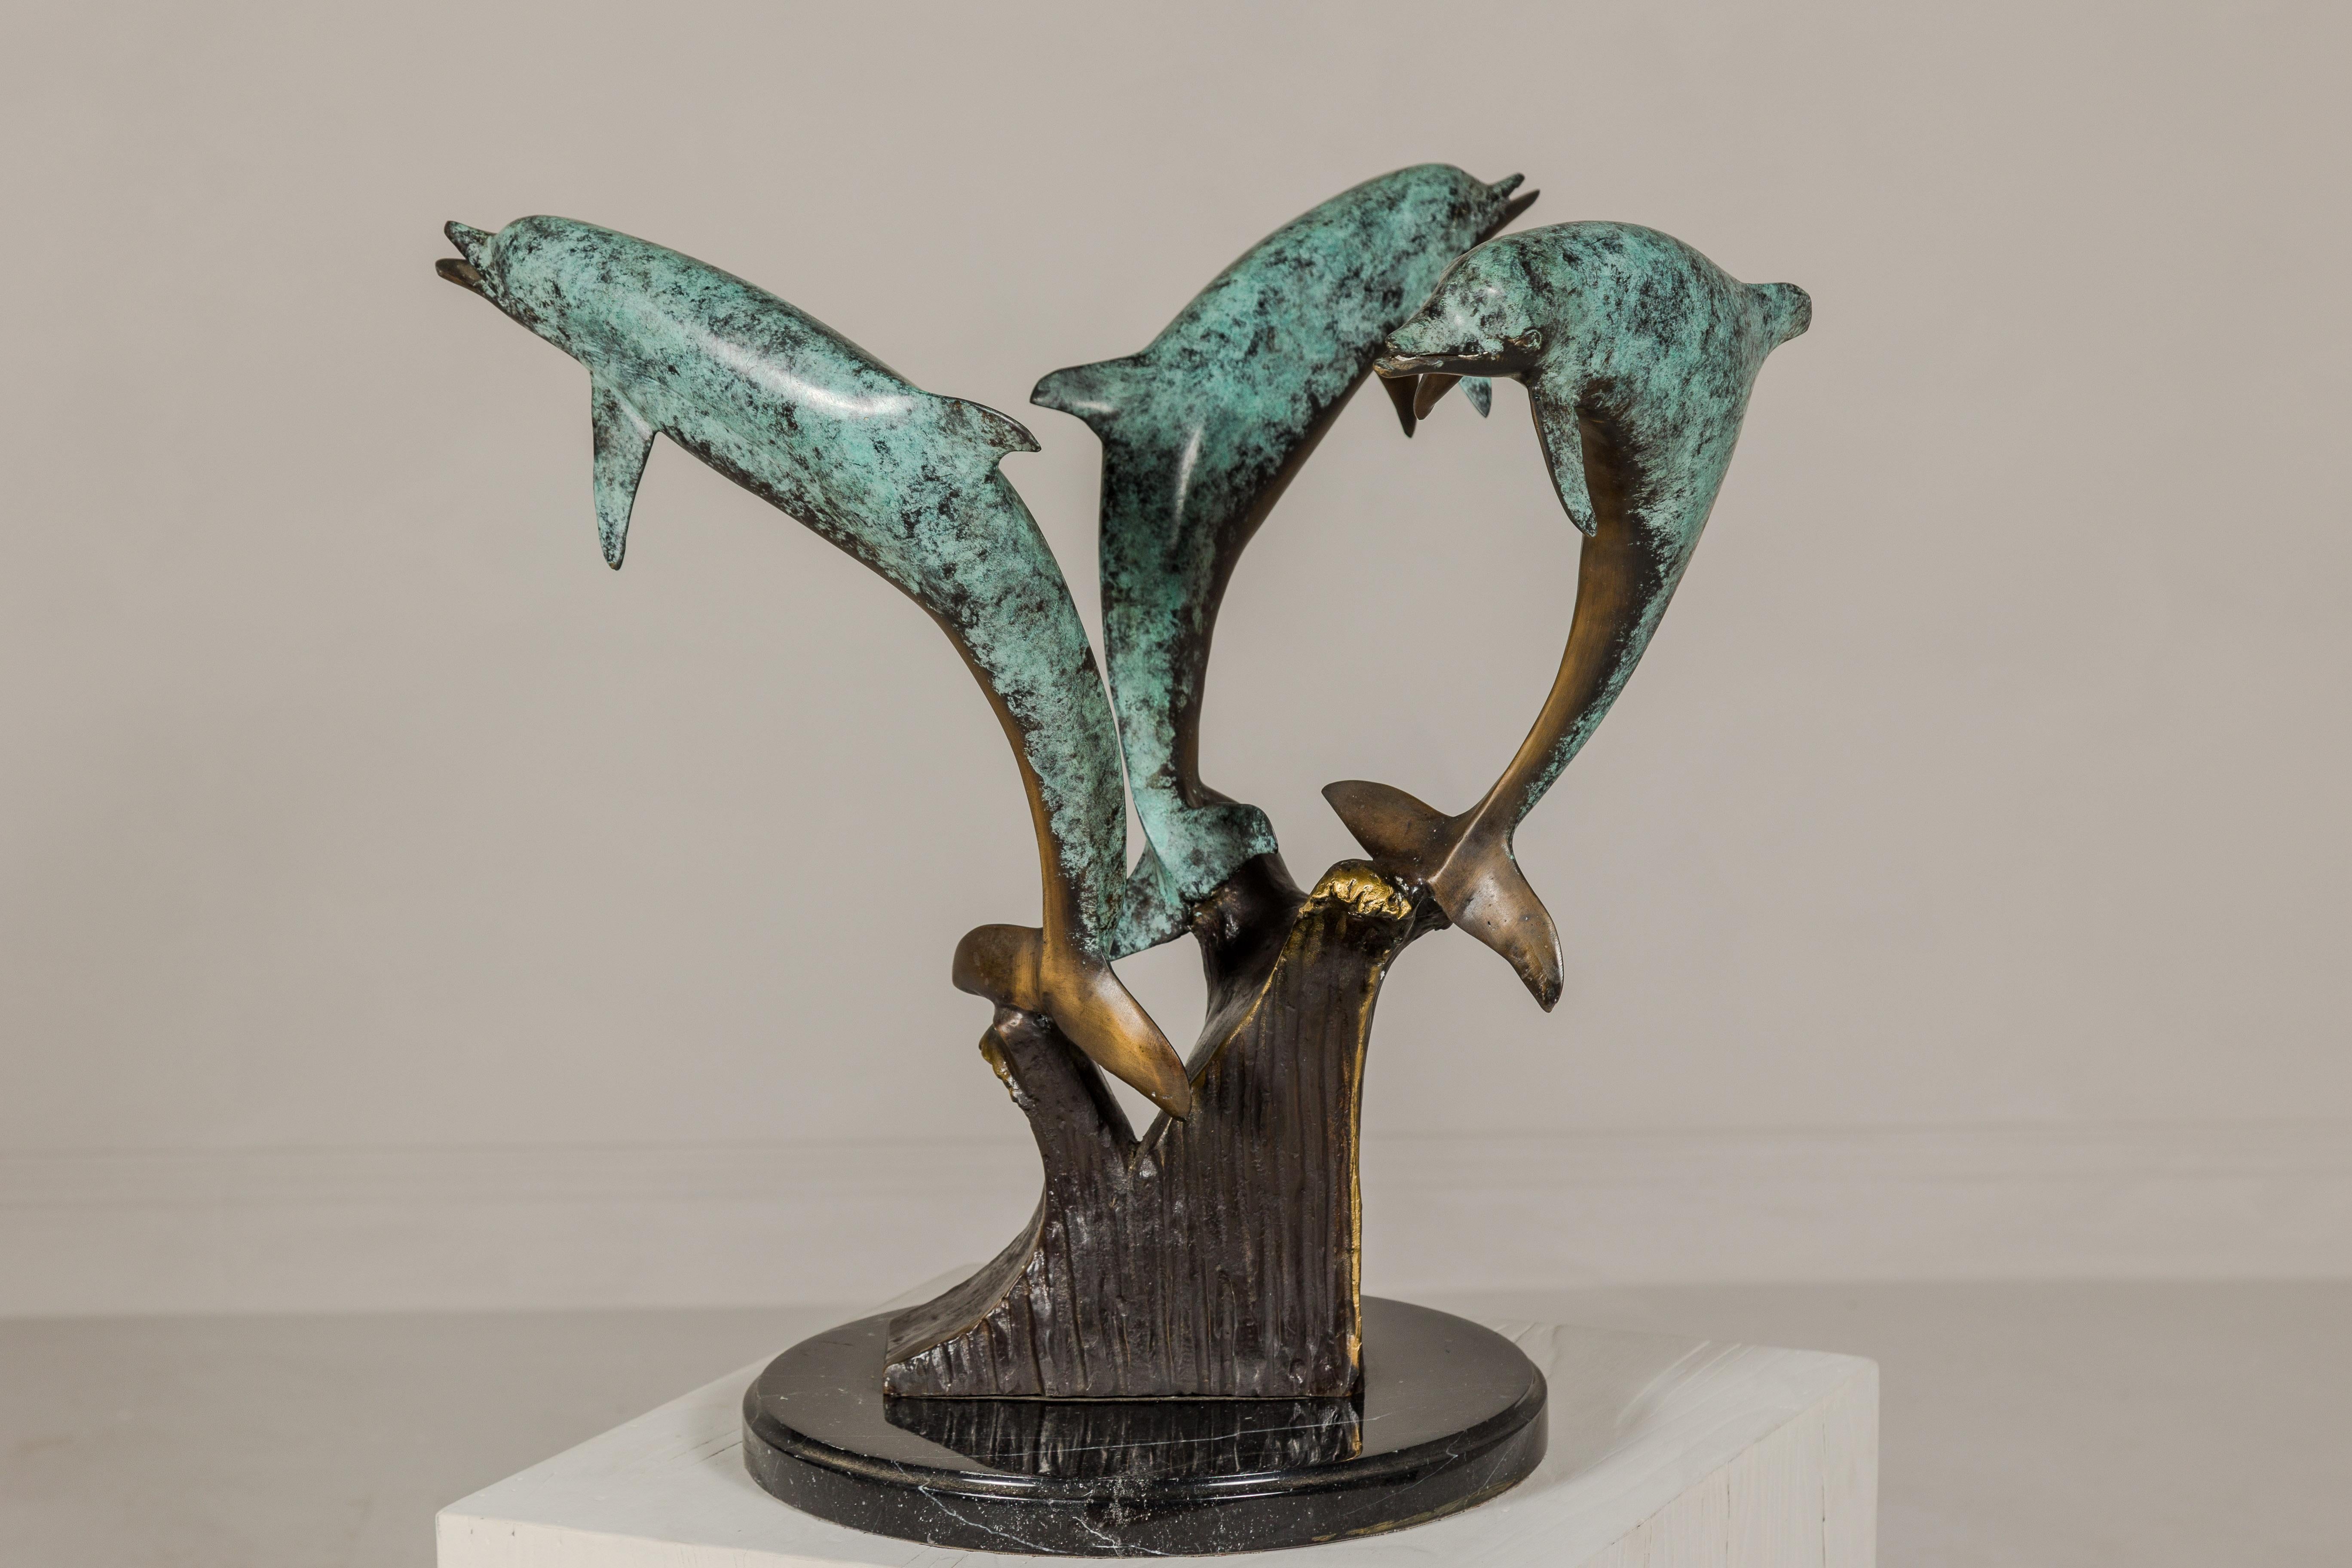 A bronze triple dolphin table base sculpture with black marble stand. Adorn your home with the captivating beauty of the sea with this exquisite bronze triple dolphin table base sculpture. Its intricate design and mesmerizing verdigris patina will